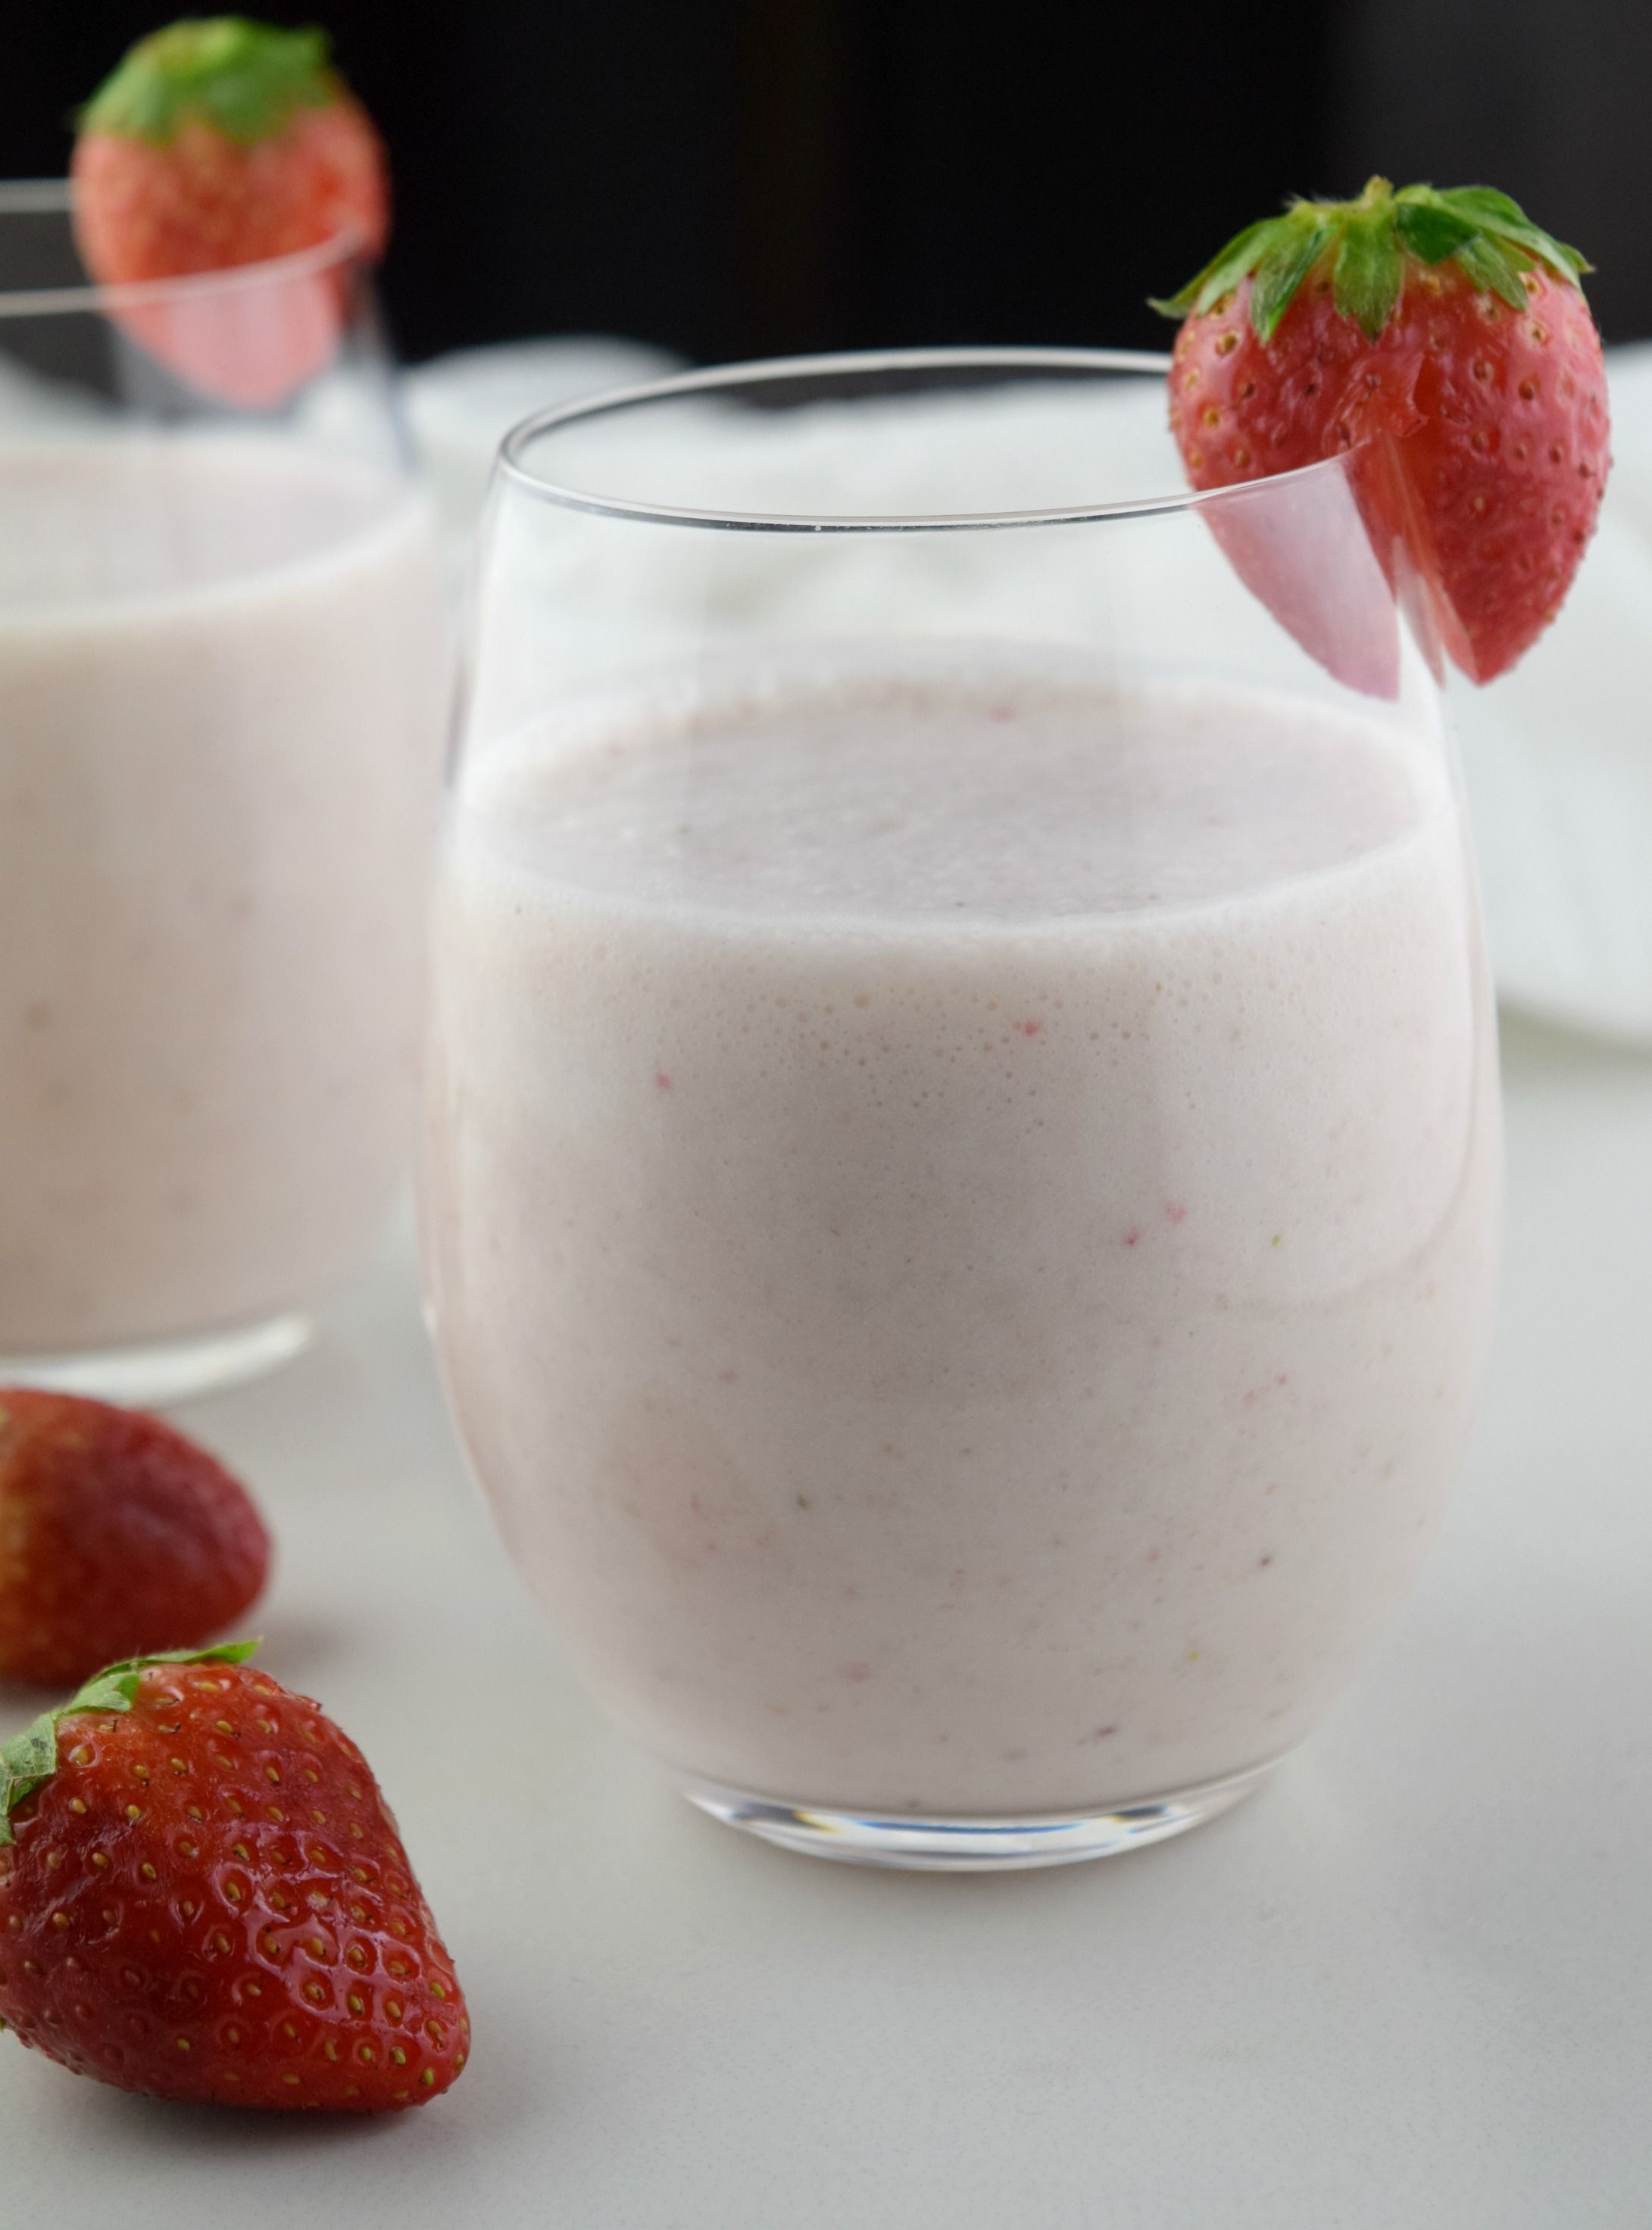 “Coconut Milk Smoothie Recipes: A Delicious and Nutritious Addition to Your Healthy Eating Routine”